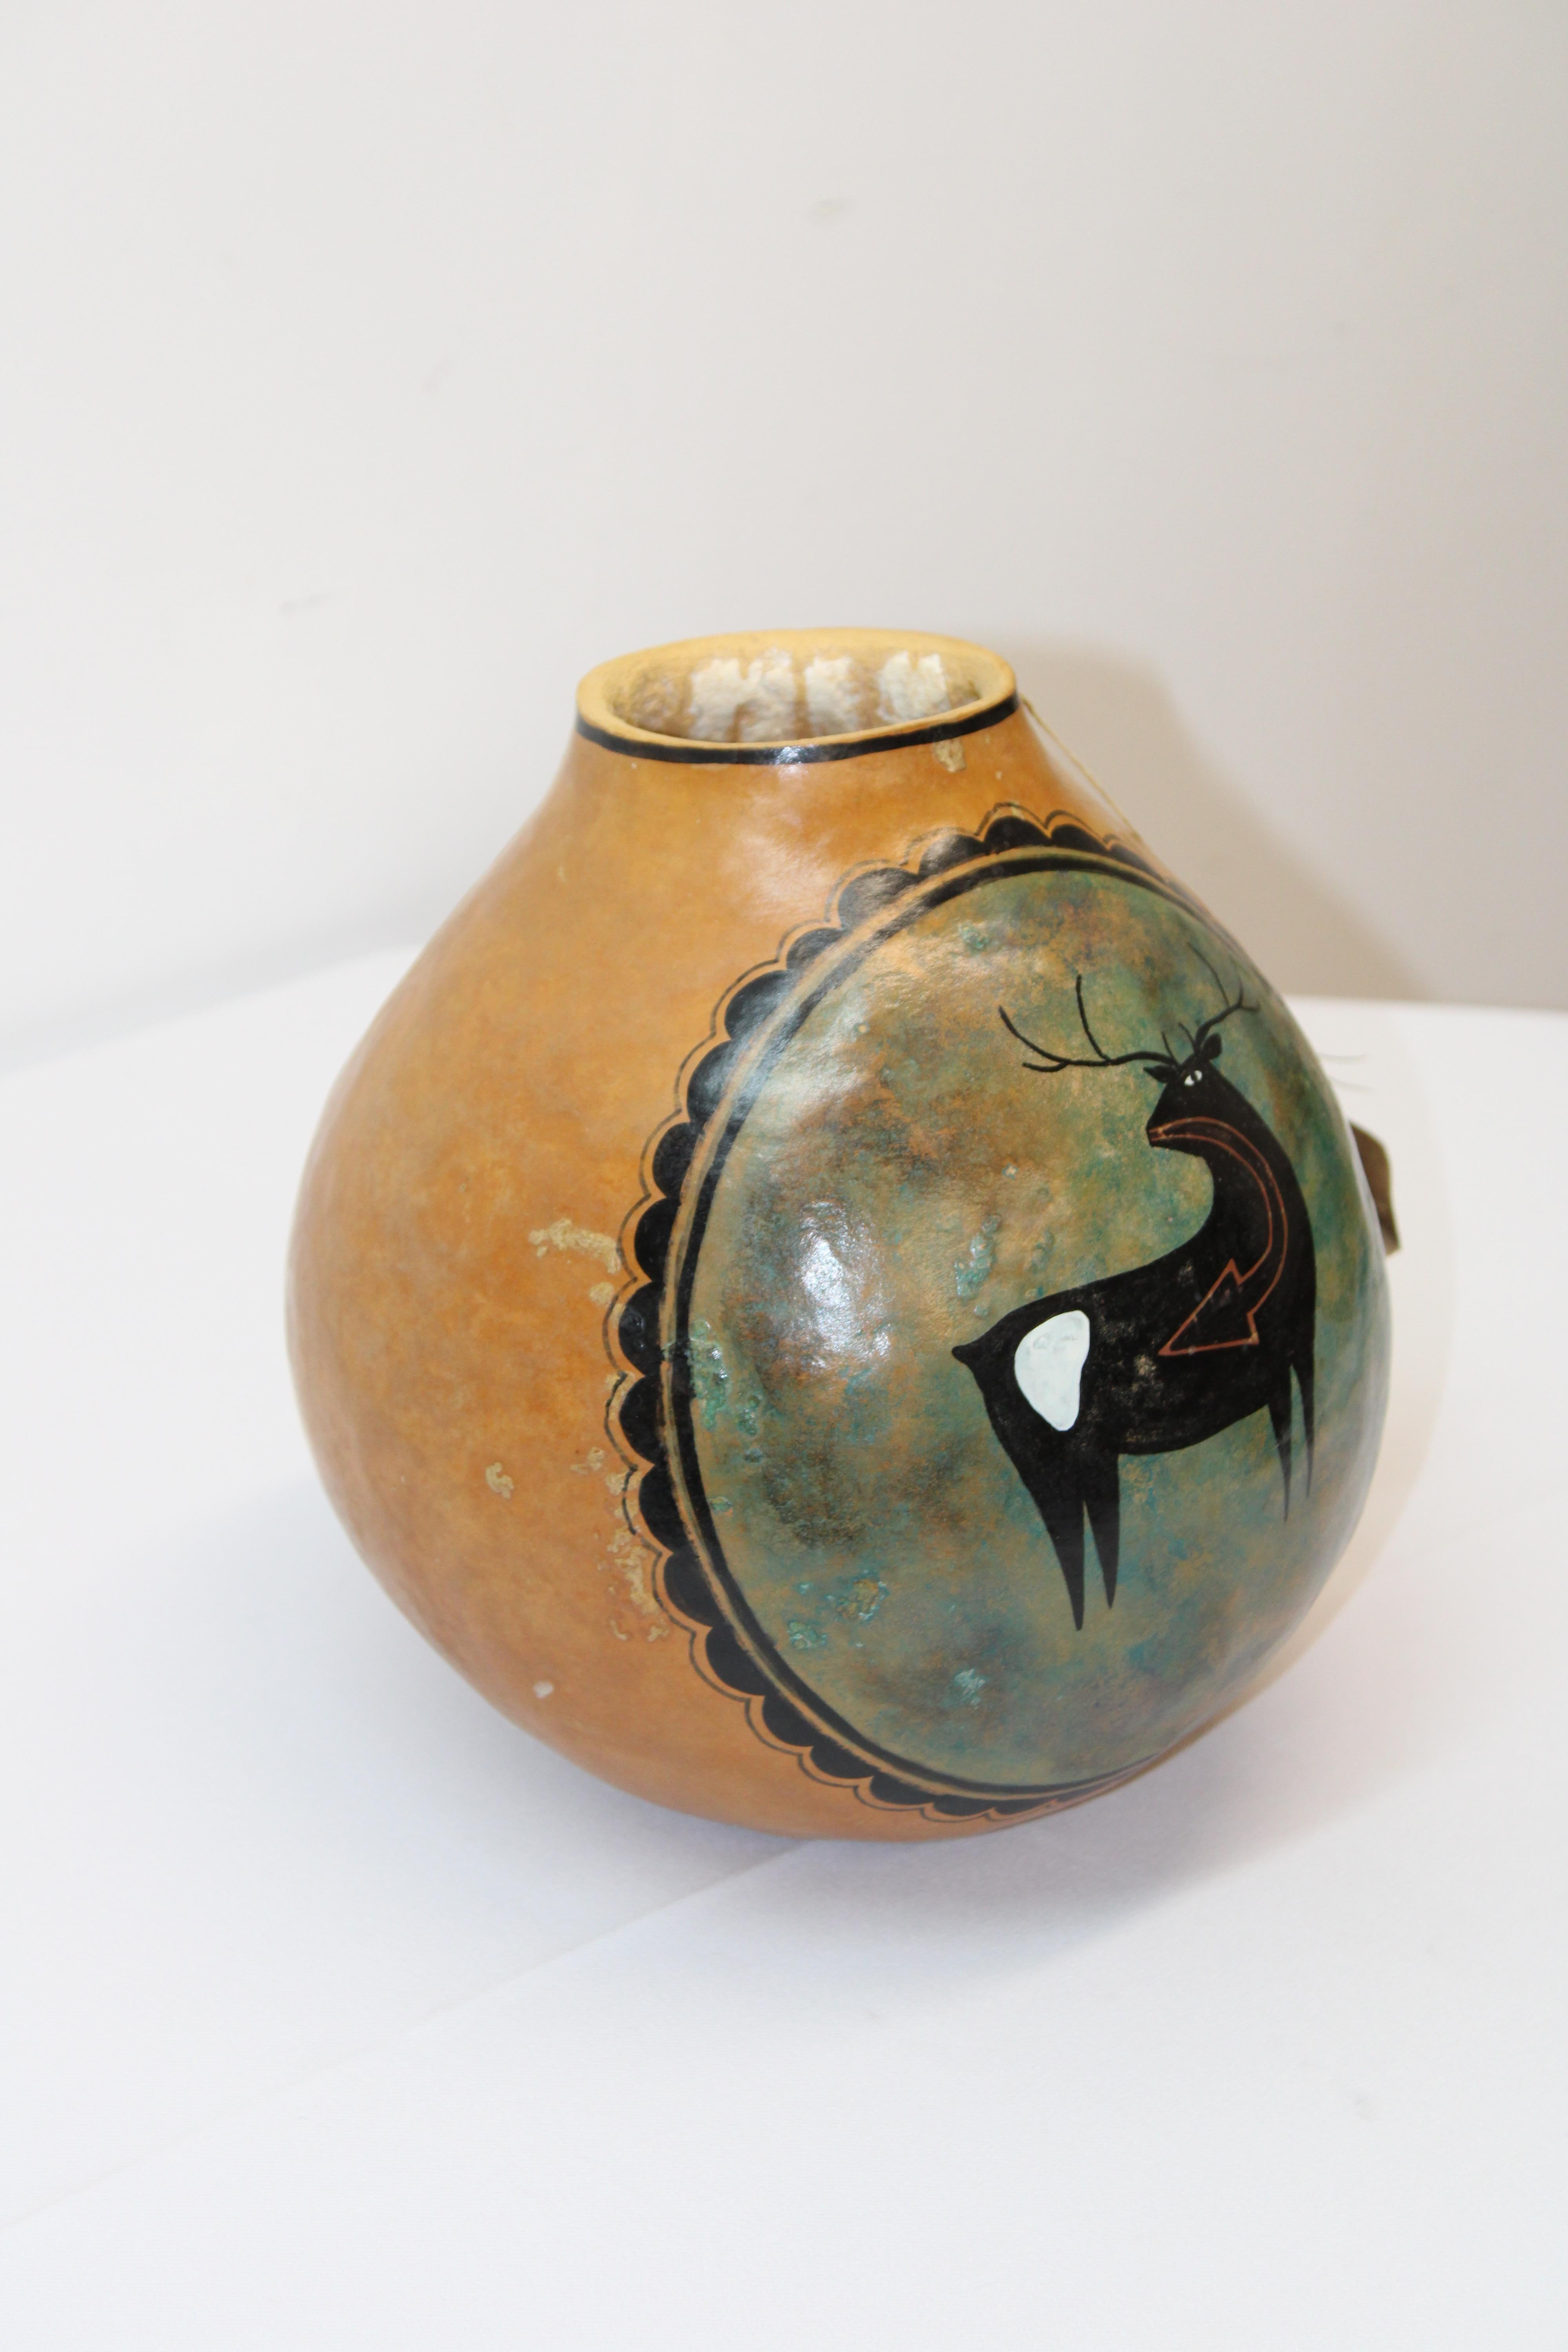 C. 20th century.

Adorable hand painted gourd by New Mexico Artist Robert Rivera.